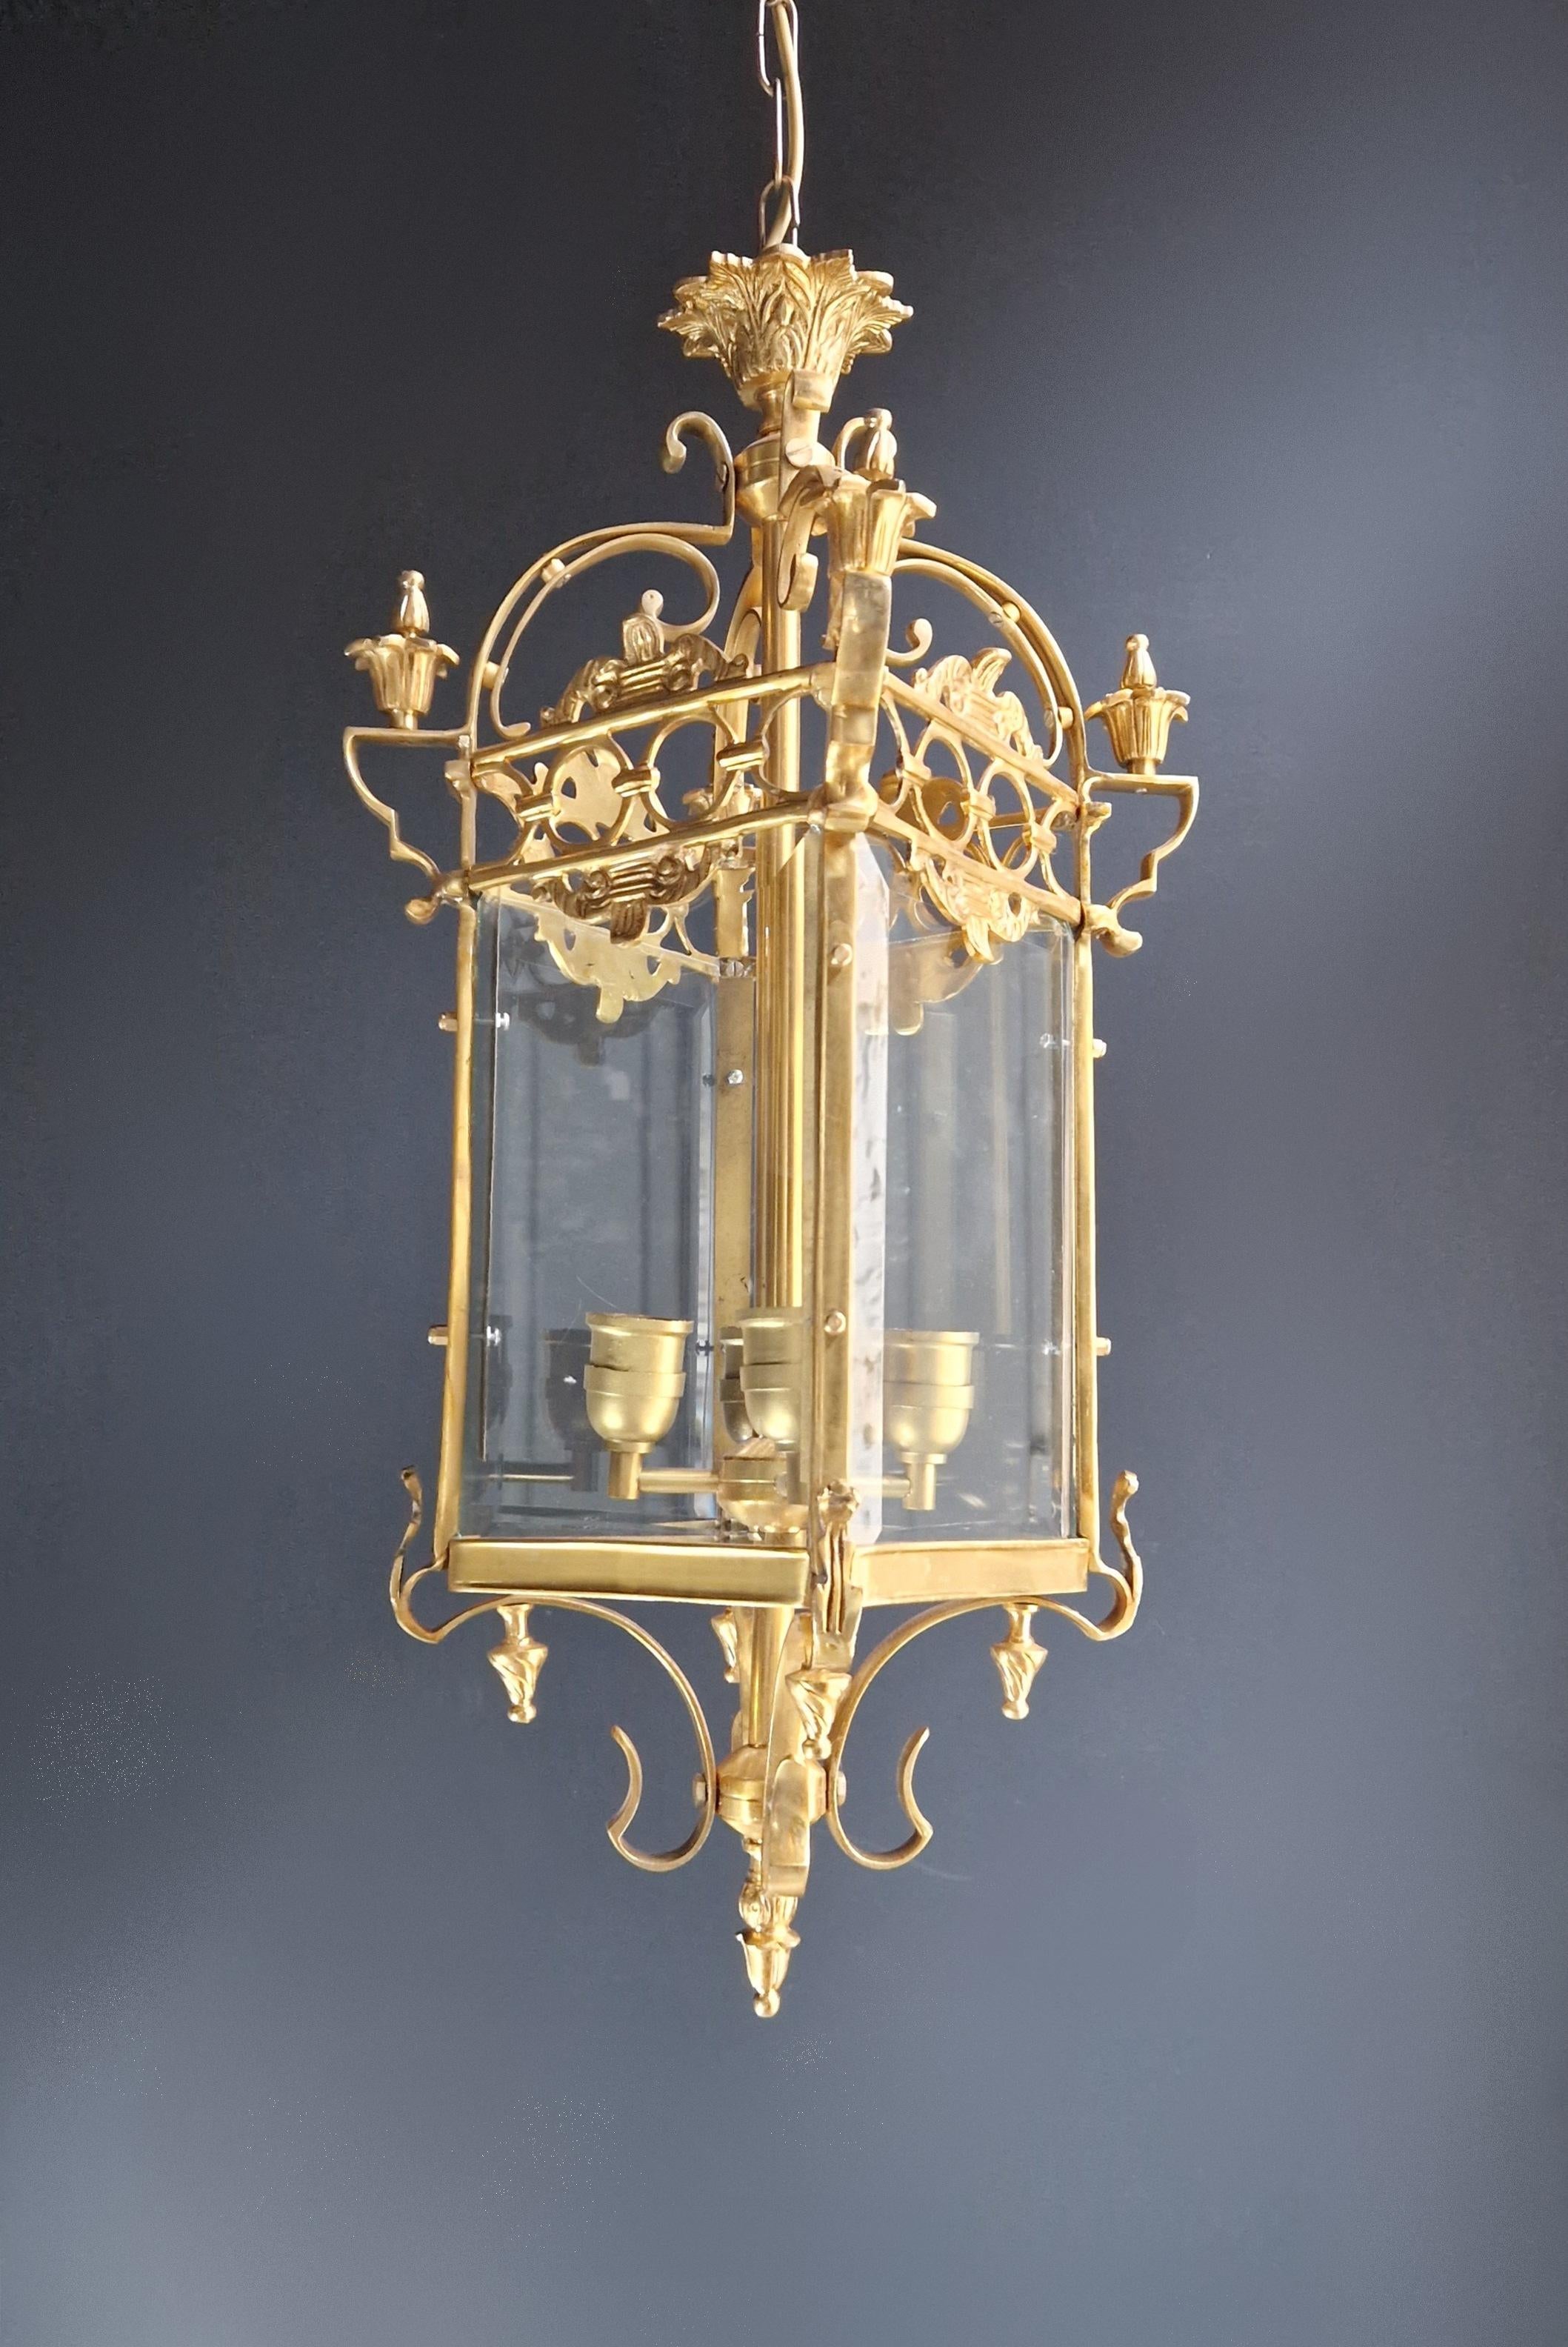 Introducing Our Exquisite Large Cylindrical Lantern-Style Brass and Glass Pendant Lighting

Elevate your space with the timeless elegance of our stunning large cylindrical lantern-style pendant, meticulously crafted from high-quality brass and glass